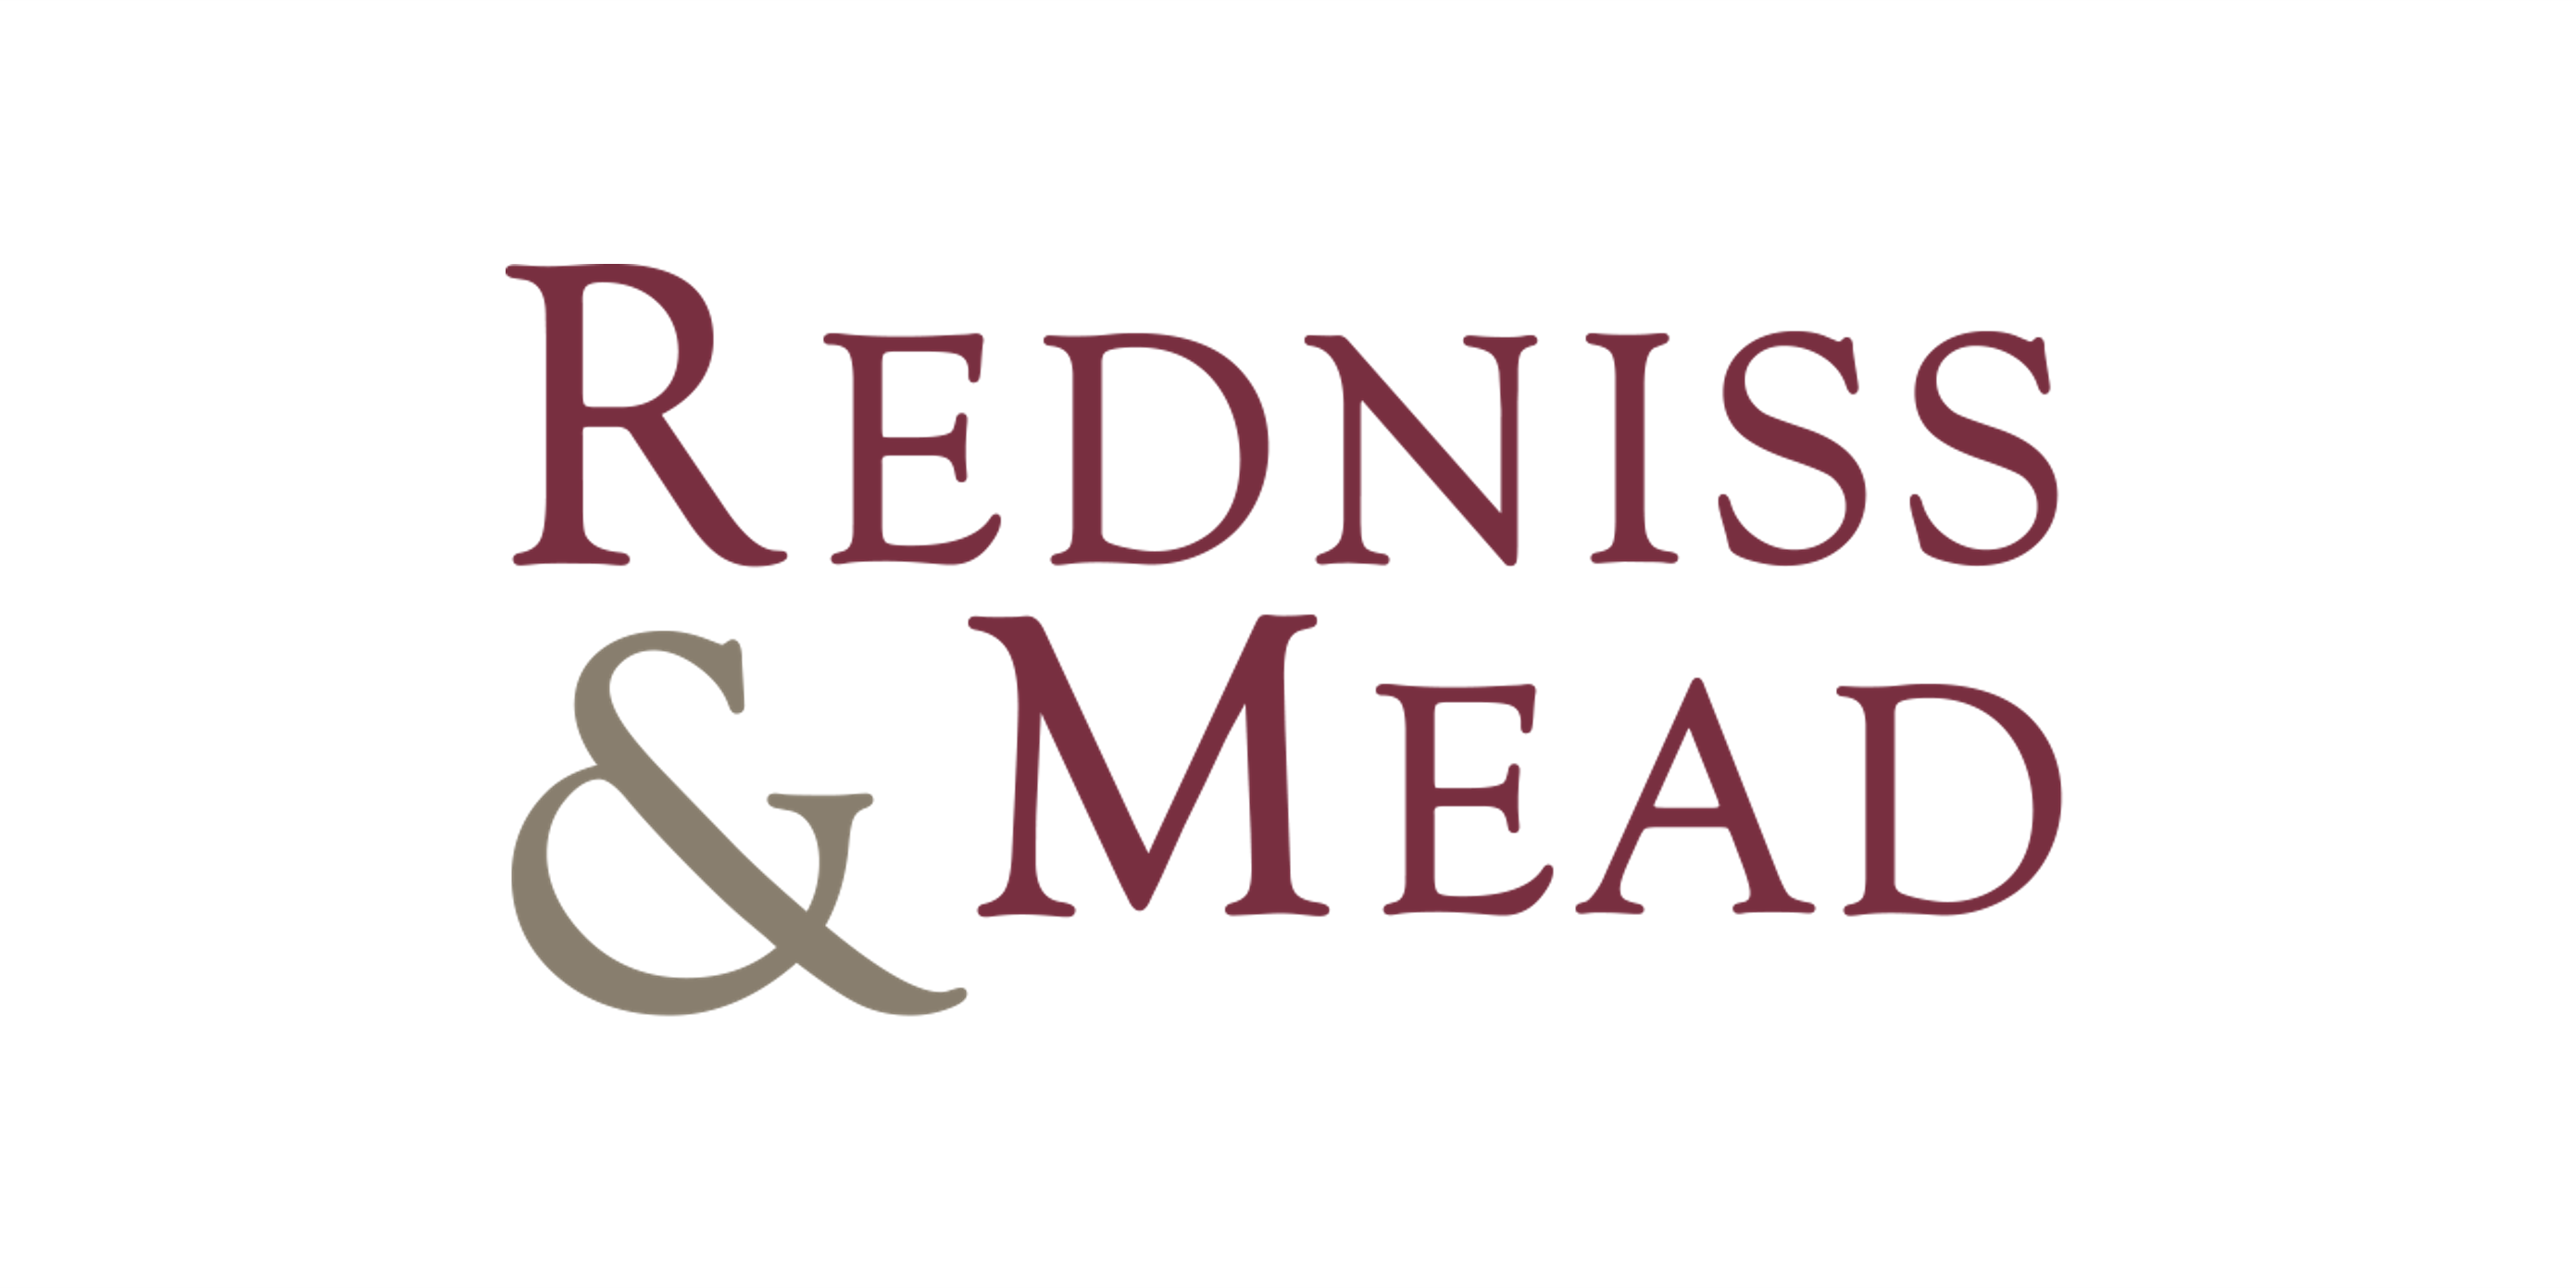 Redniss & Mead, proud member of the Greater Norwalk Chamber